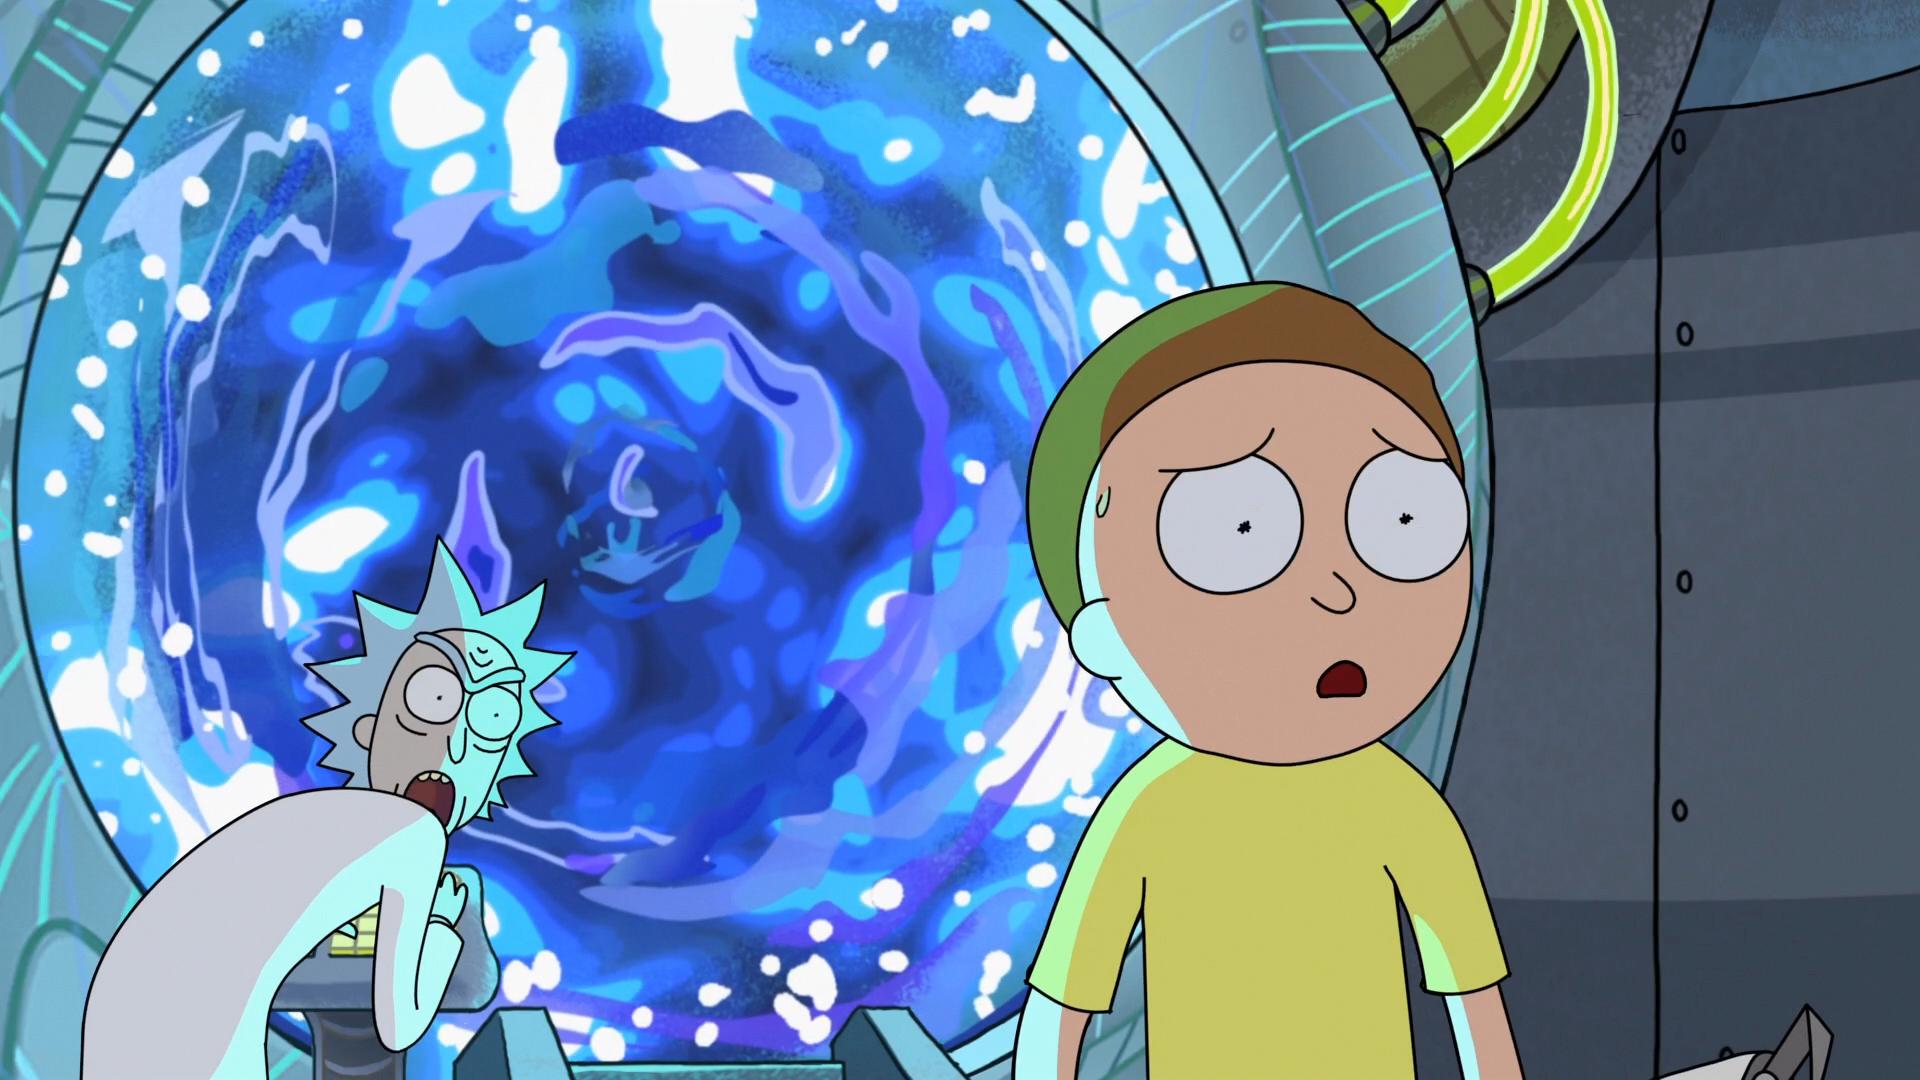 rick and morty, tv show, morty smith, rick sanchez